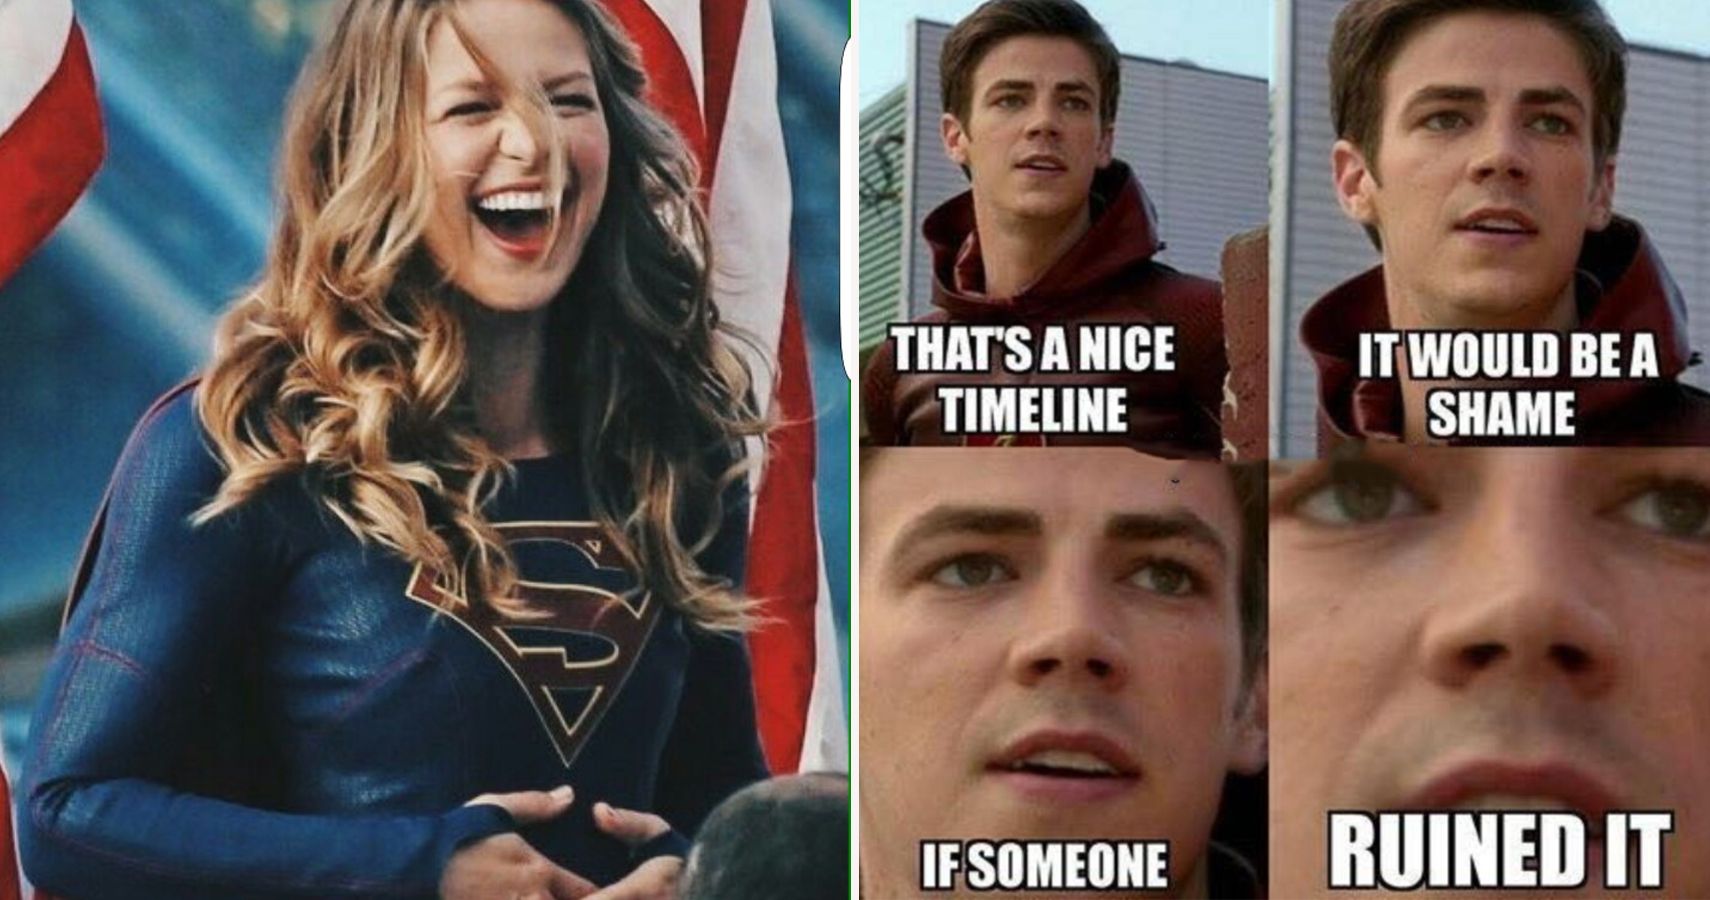 25 Arrowverse Memes That Are Too Hilarious For Words